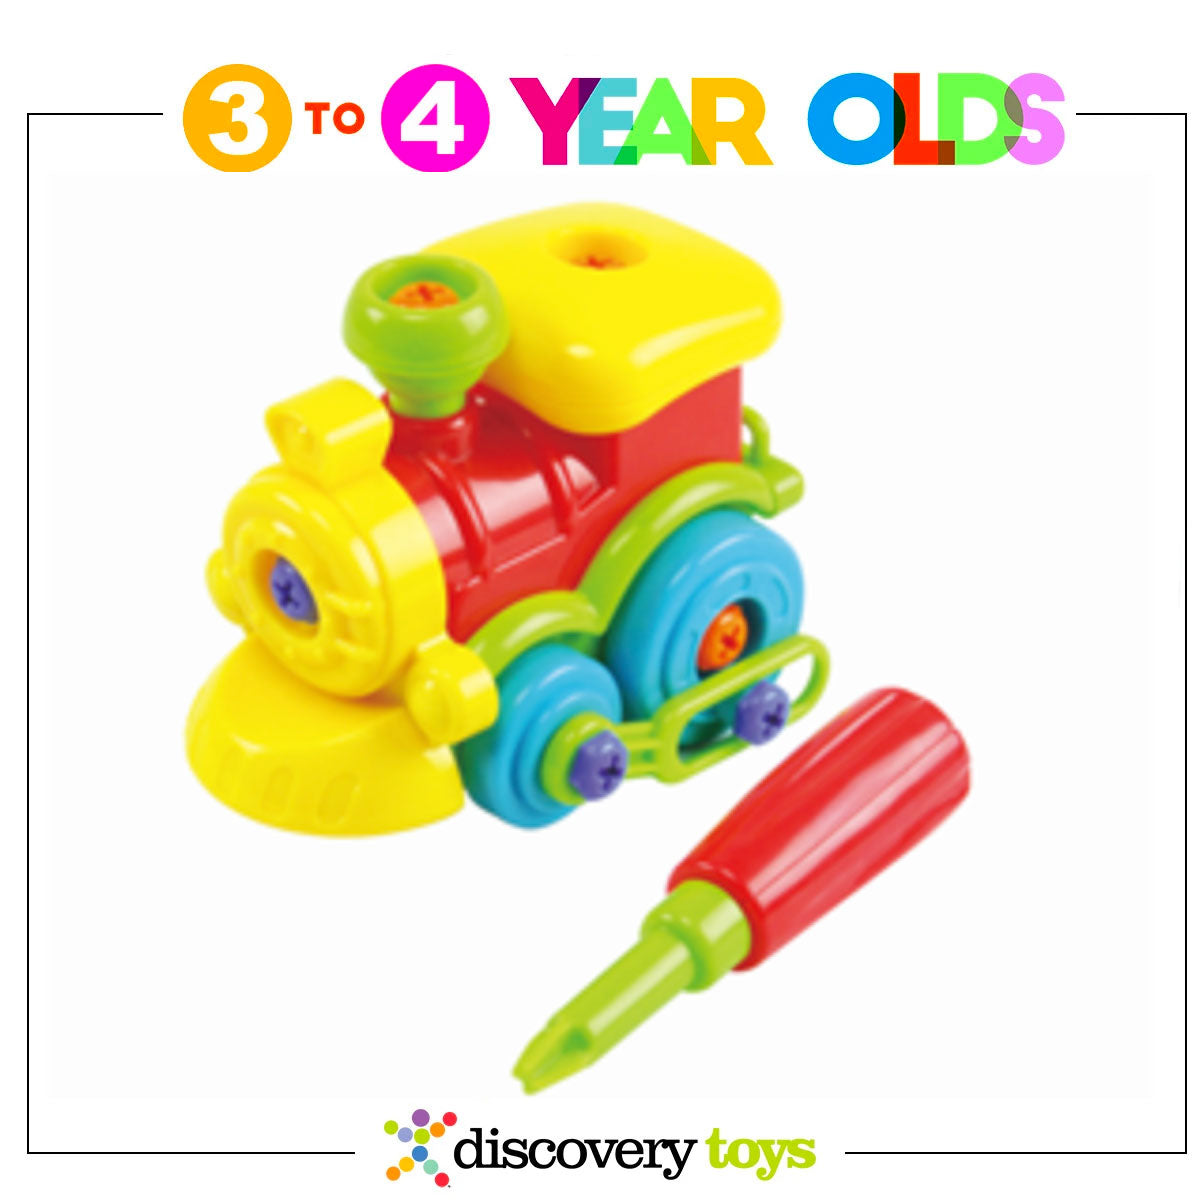 3 to 4 Years Old